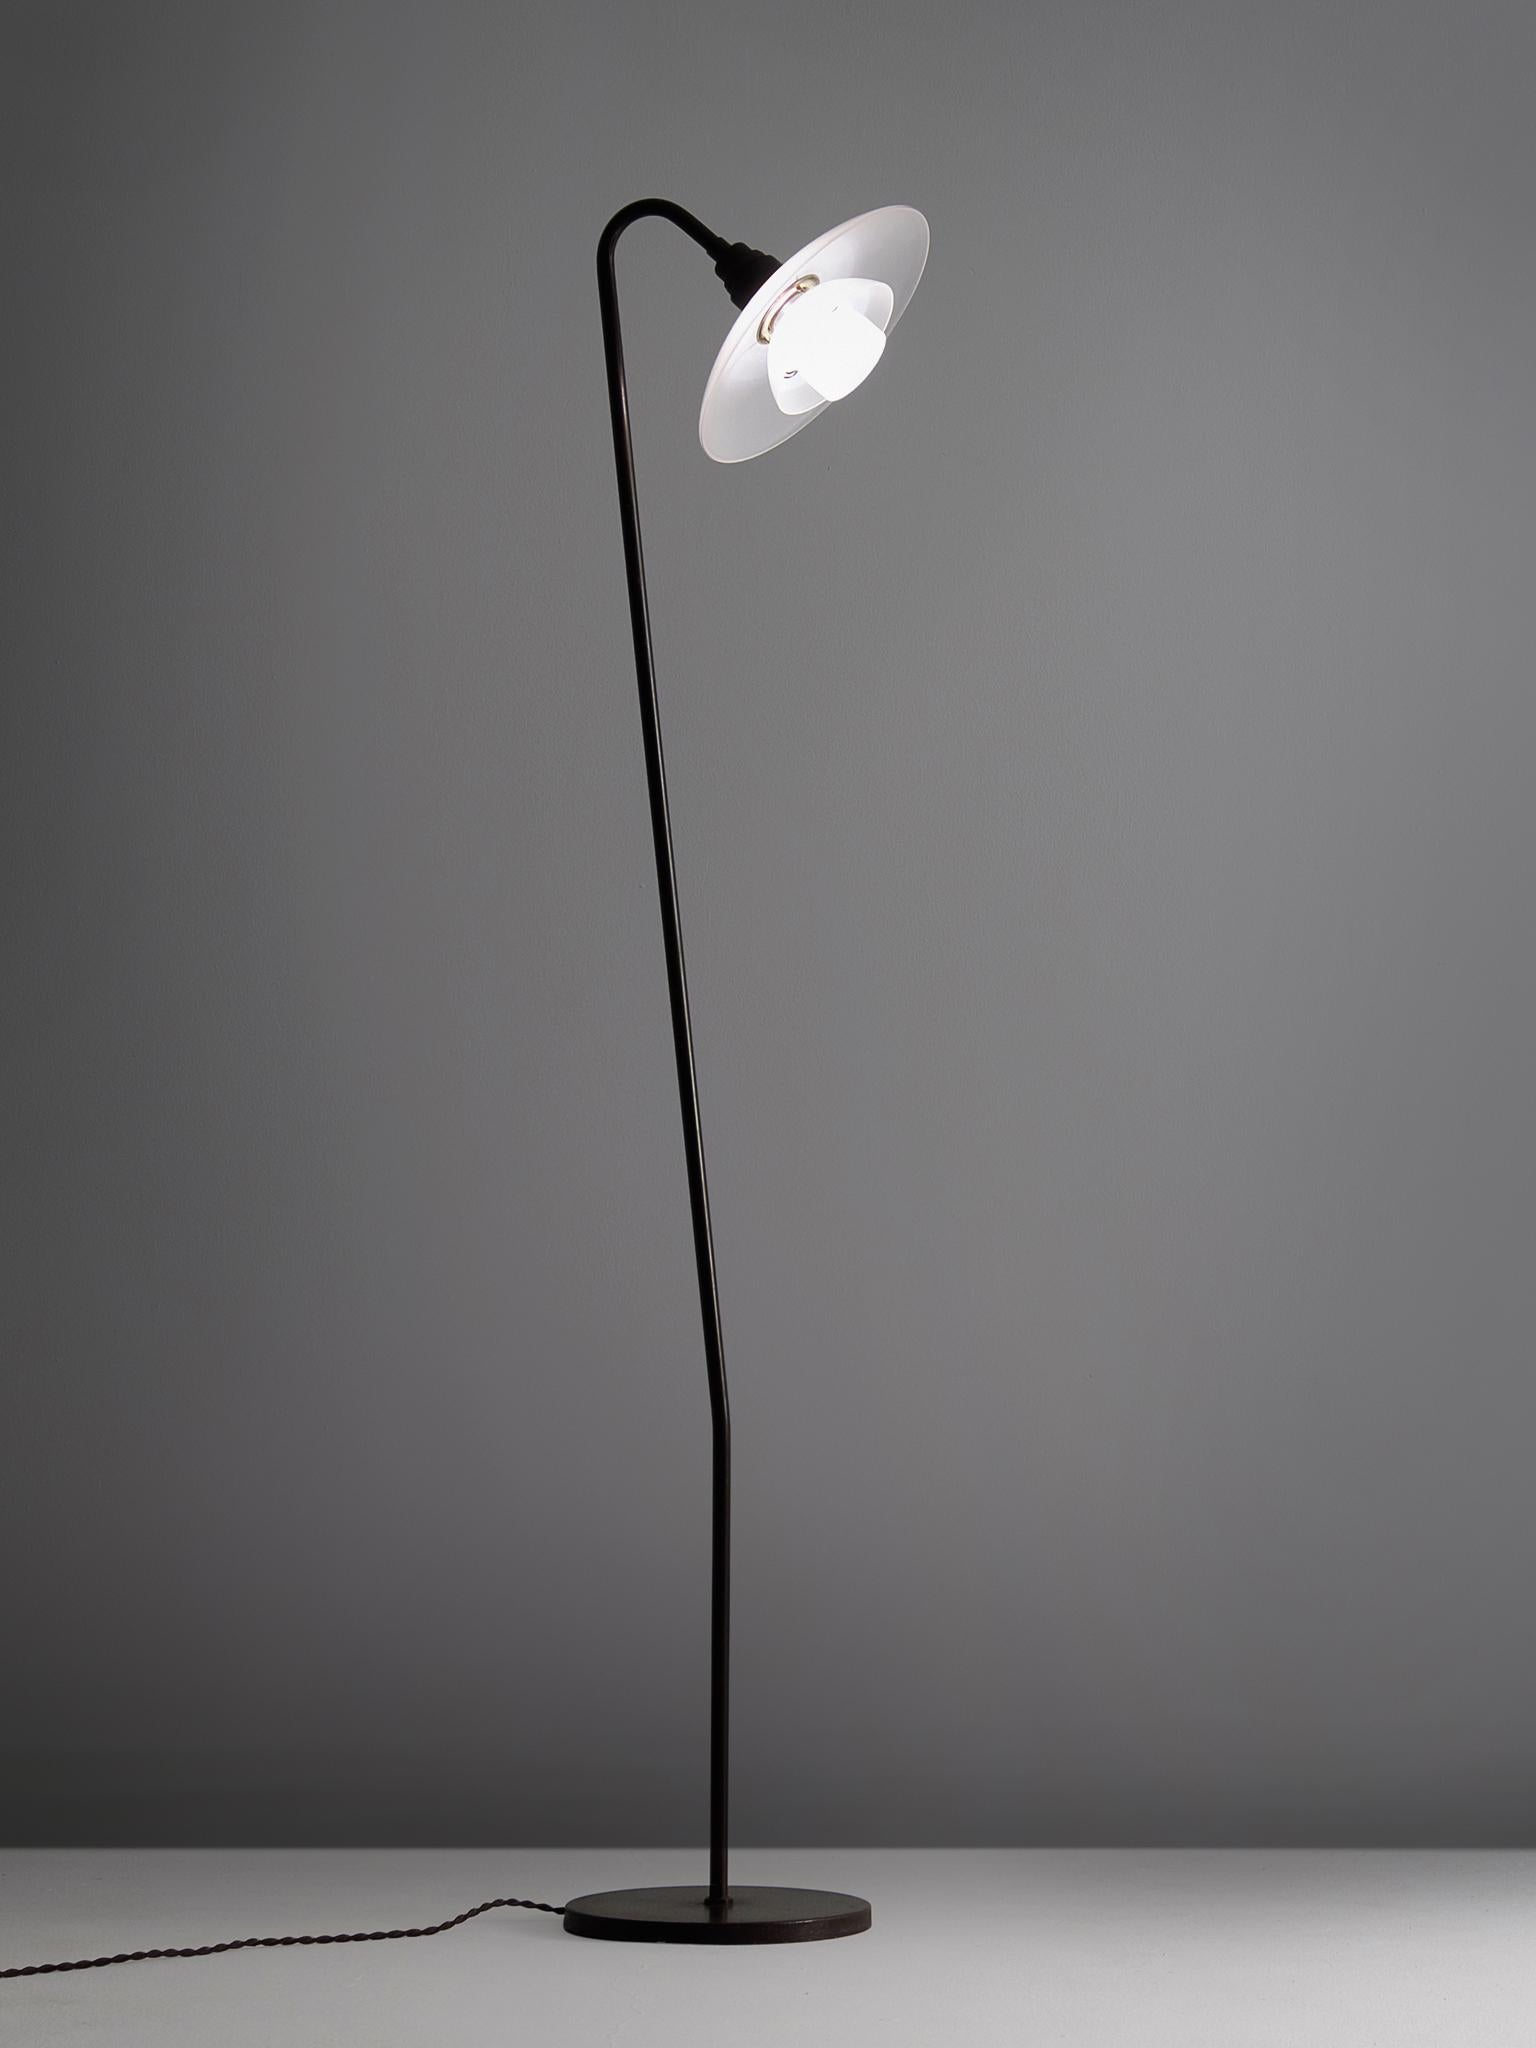 Poul Henningsen for Louis Poulsen, PH-7 floor lamp, metal, glass, Denmark 1933

Wonderful example of standing lamps from superb Danish quality. This example, also named 'PH-7' or the 'Standard lamp' was designed by Poul Henningsen in 1933, and